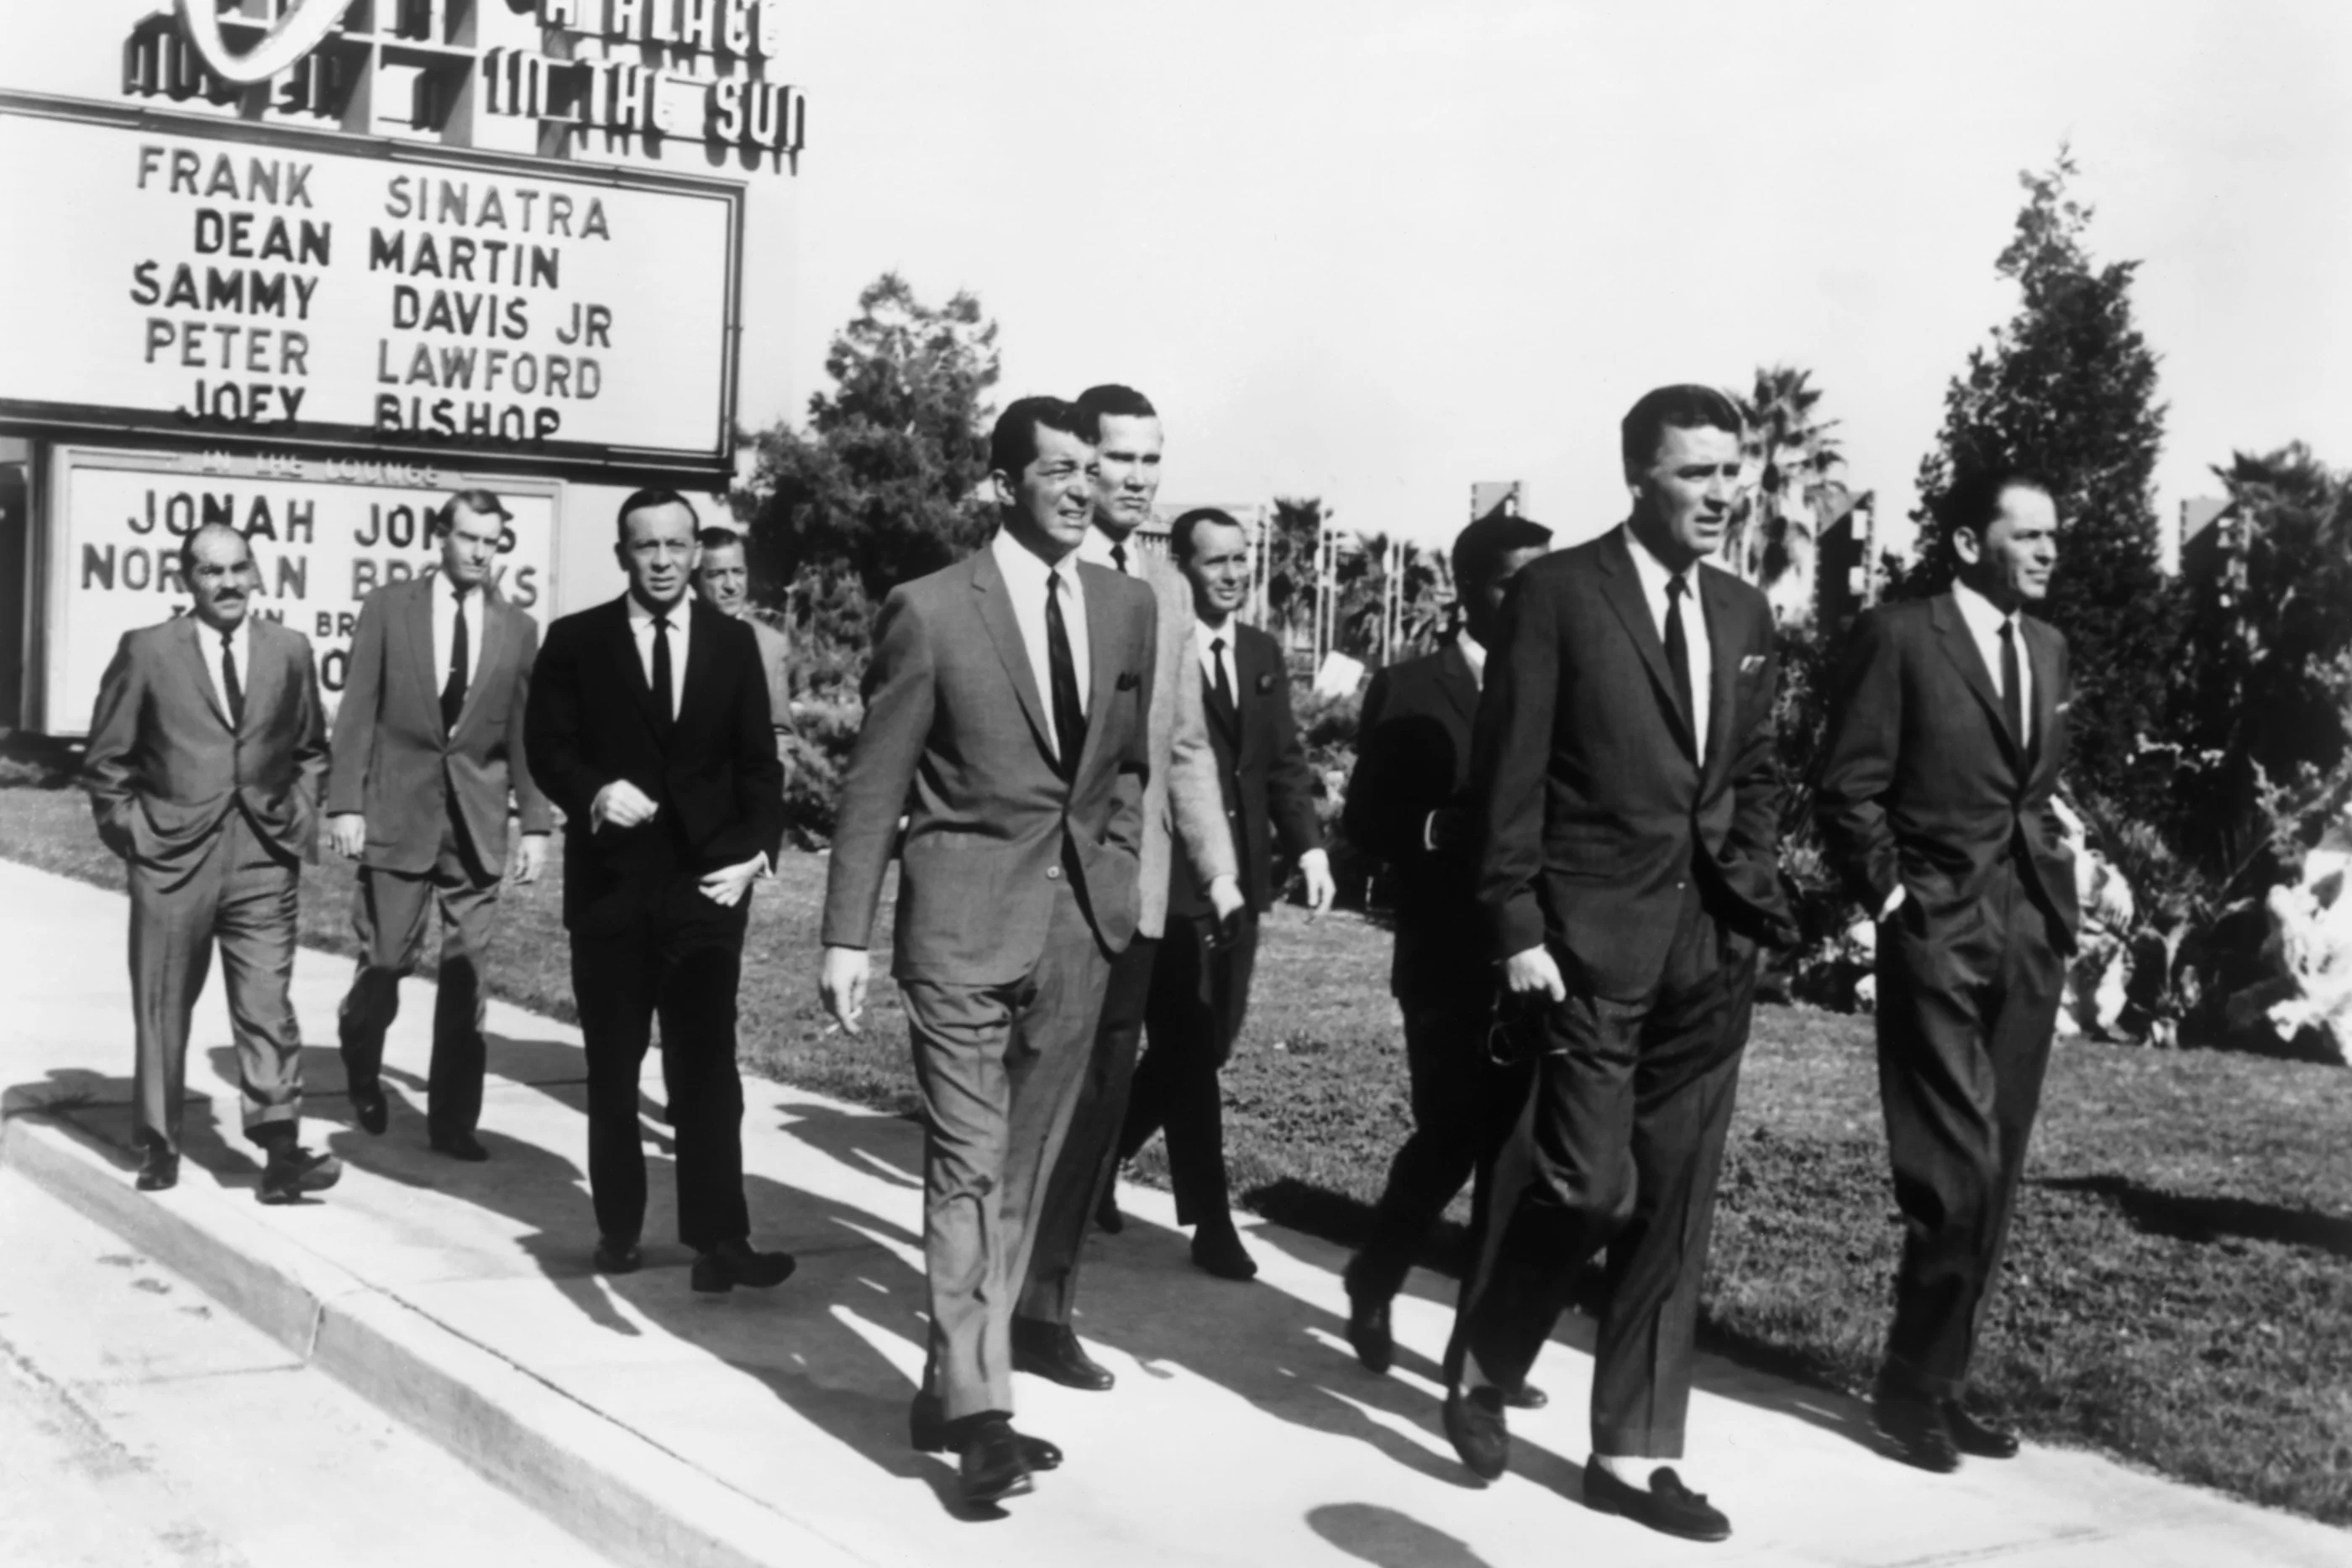 2800x1867 Globe Photos Entertainment The Rat Pack Walking At The Sands 18